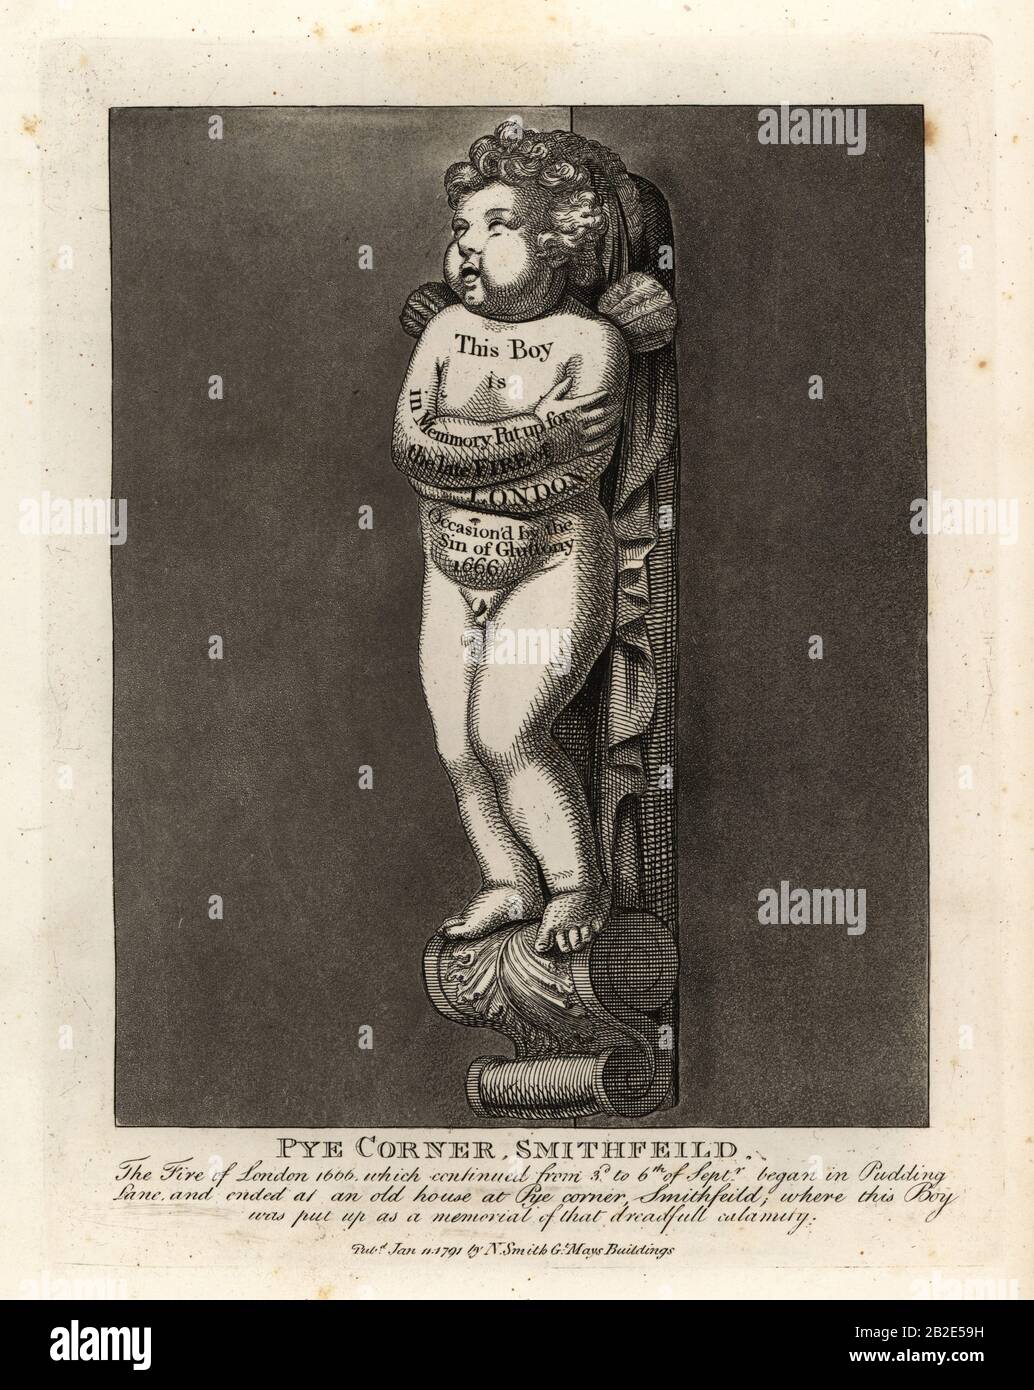 Monument of a boy on Pye Corner, Smithfield, to mark the Fire of London of 1666 in nearby Pudding Lane. This boy is in memory of the Late Fire of London, Occasion’d by the Sin and Gluttony 1666. Copperplate engraving by John Thomas Smith after original drawings by members of the Society of Antiquaries from his J.T. Smith’s Antiquities of London and its Environs, J. Sewell, R. Folder, J. Simco, London, 1791. Stock Photo